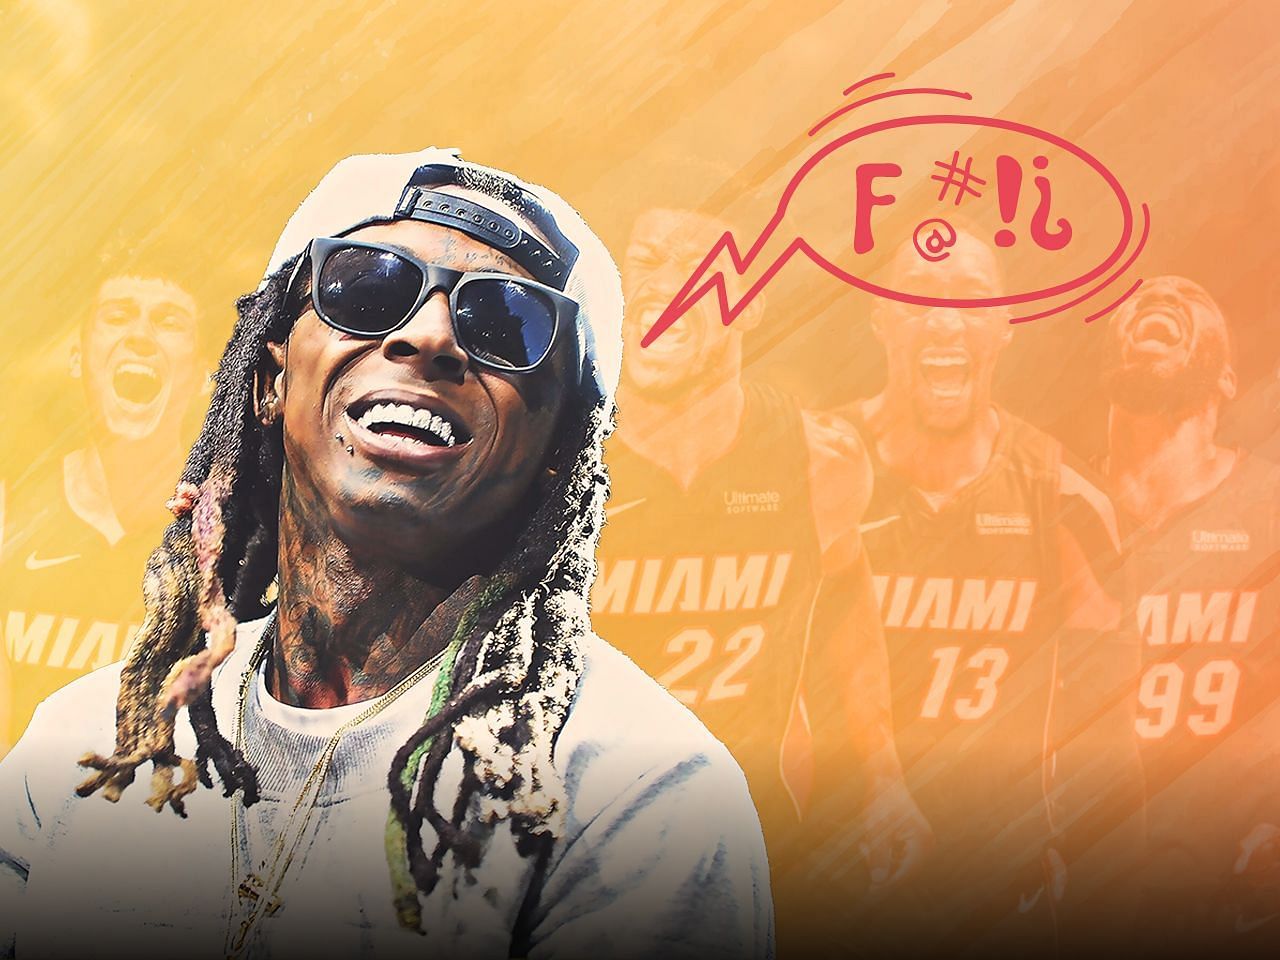 Rapper Lil Wayne once took a shot at the Miami Heat for allegedly causing him to be banned from NBA games in 2013.